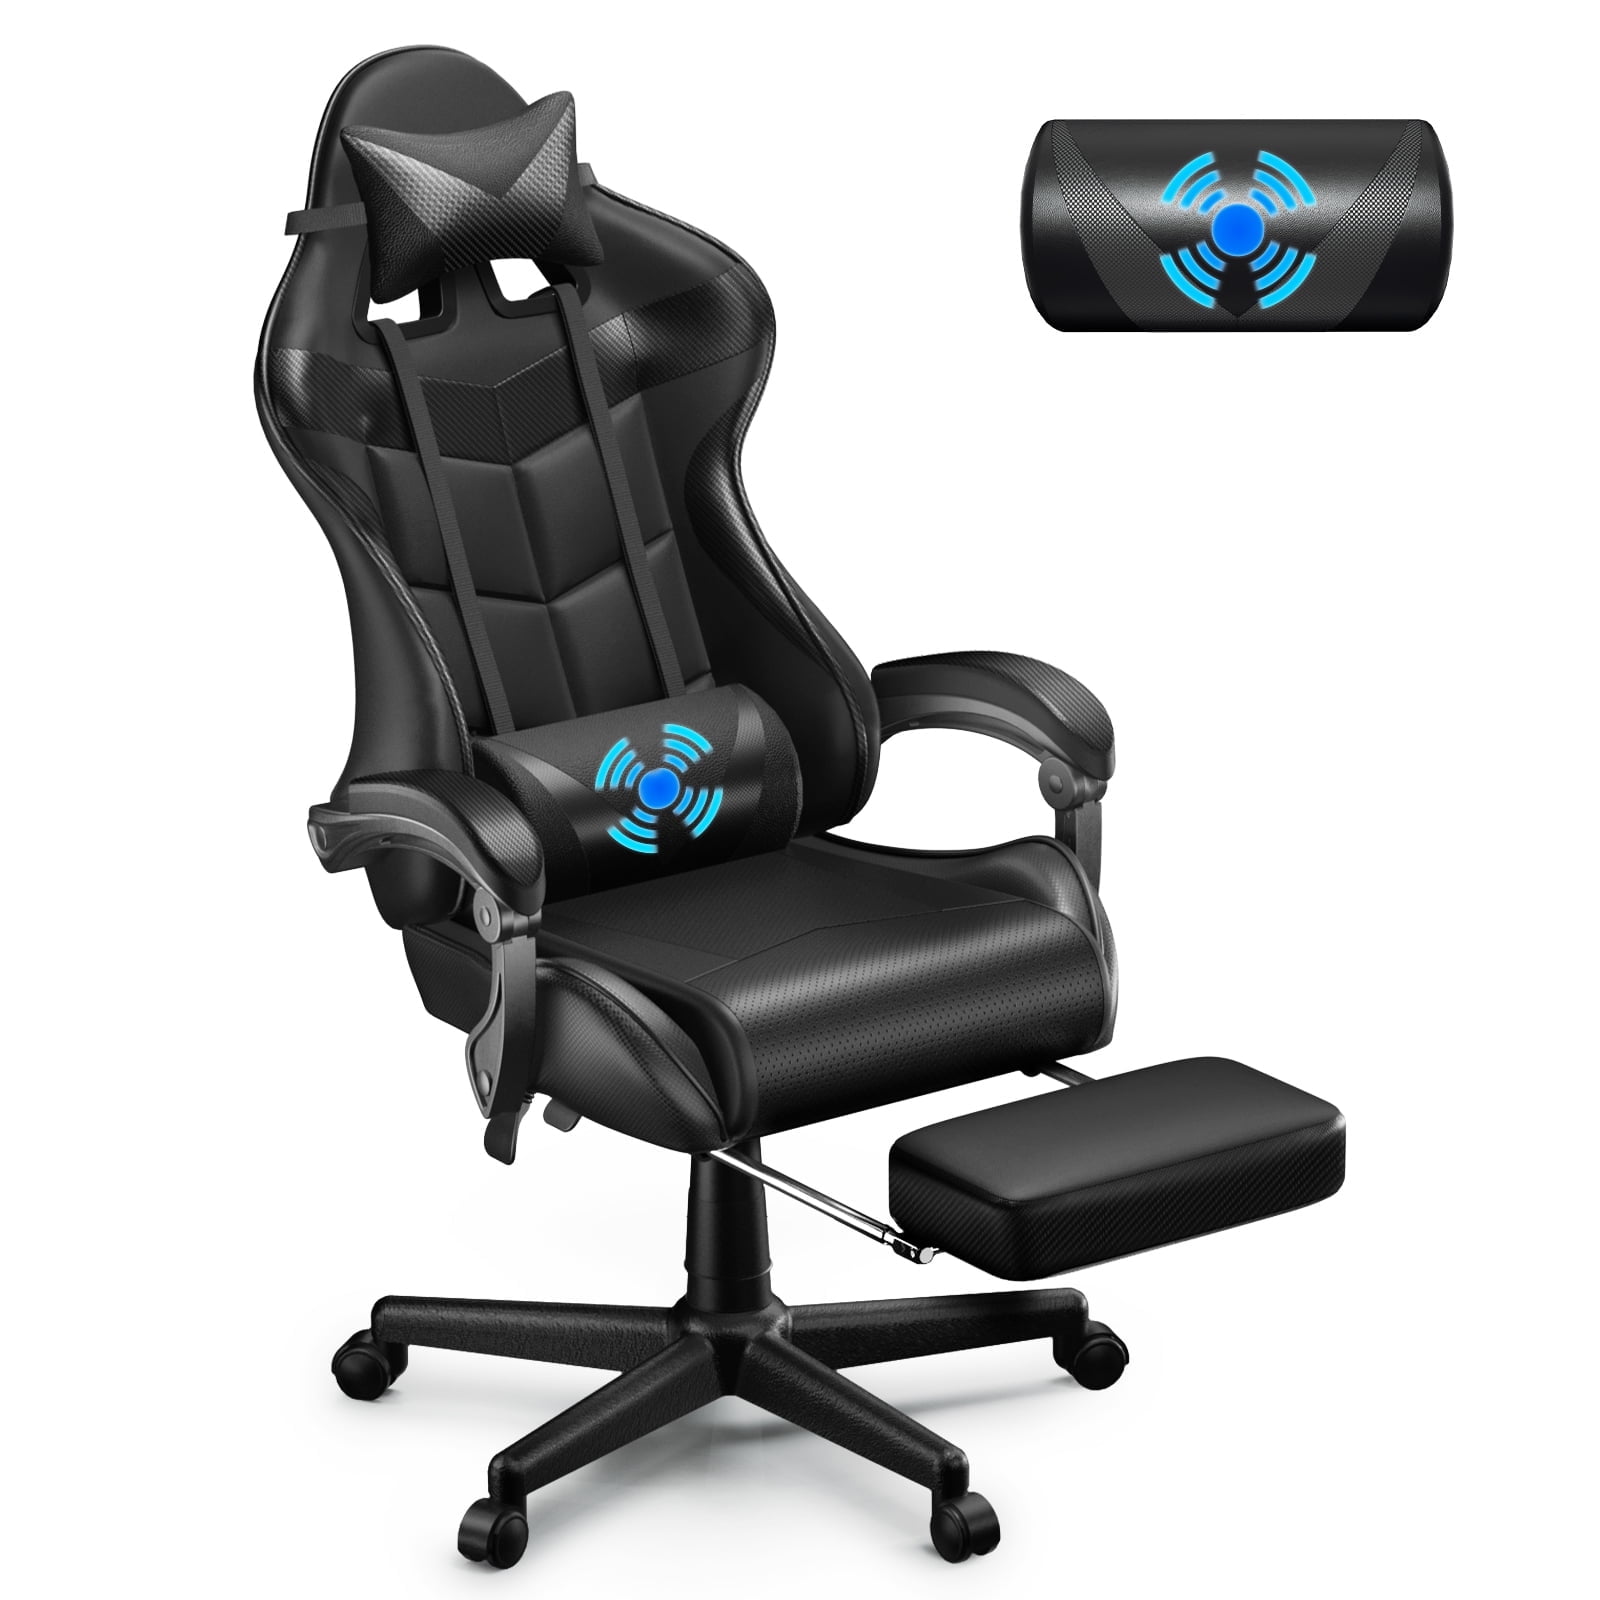 Playstation Gaming Chair With Foot Rest (Blue)